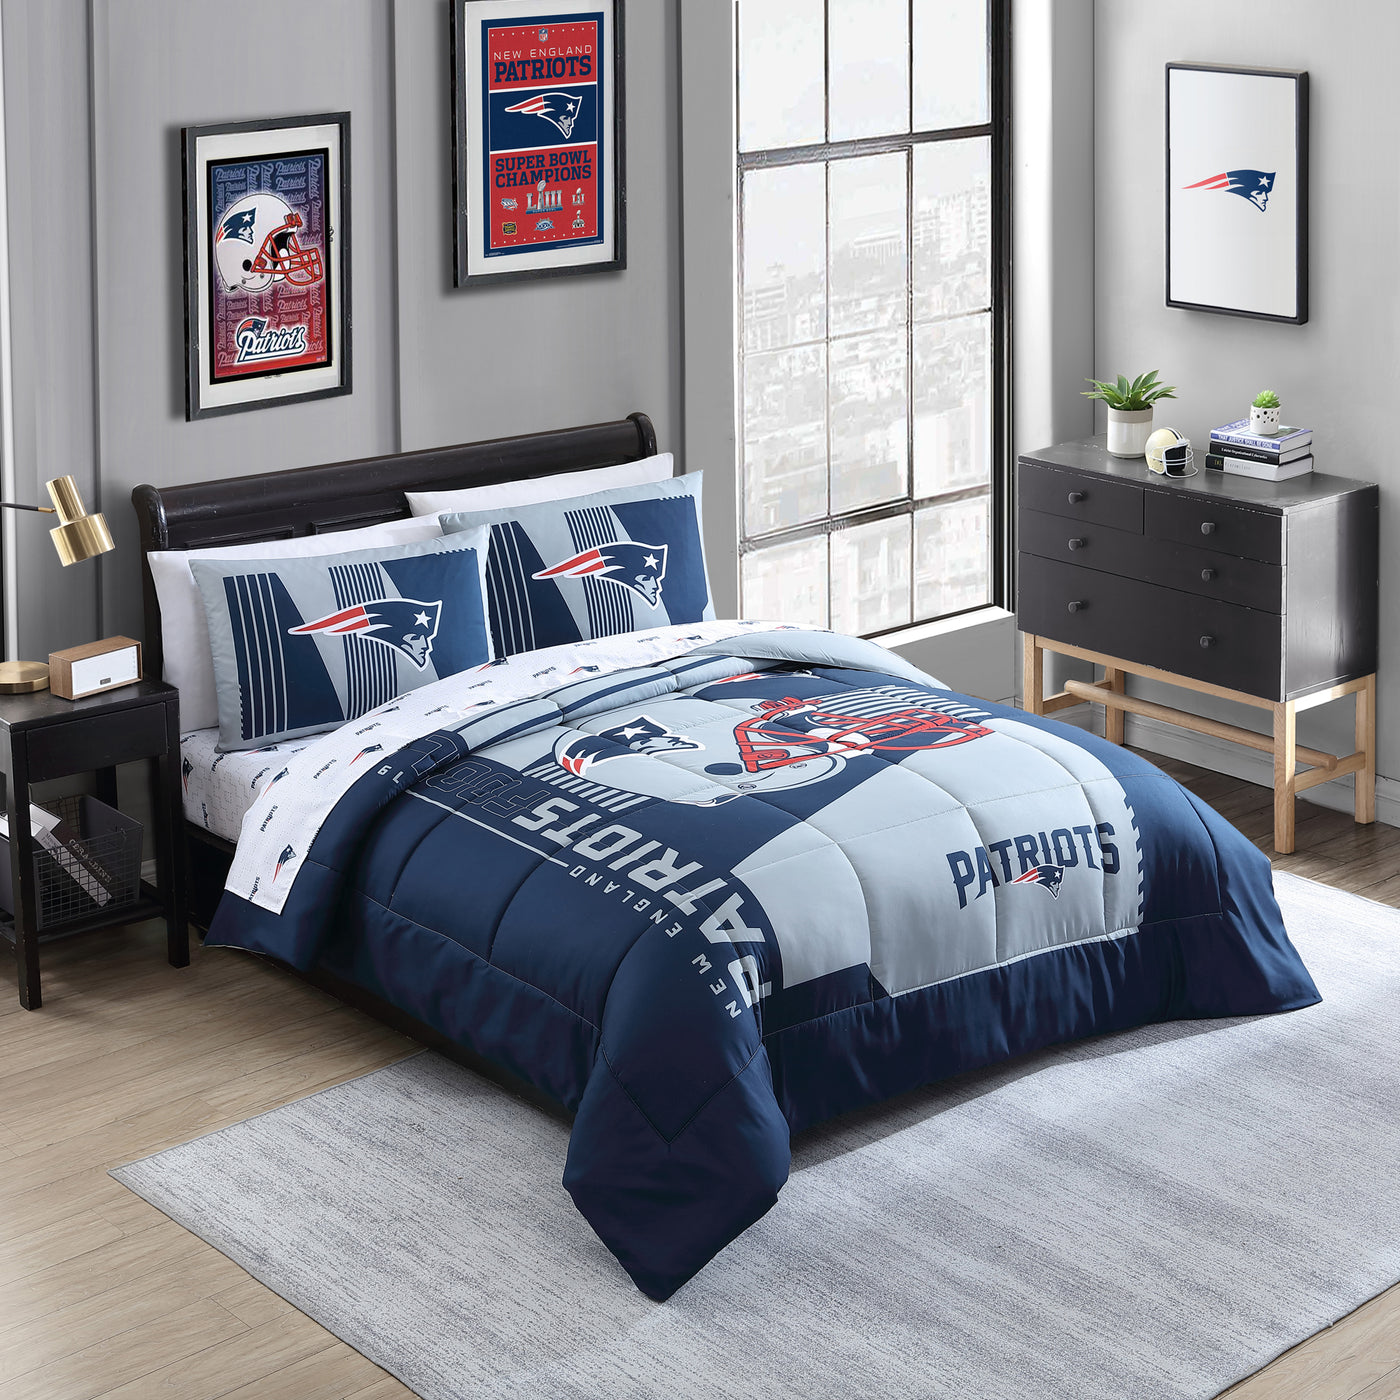 New England Patriots Status Bed In A Bag Queen